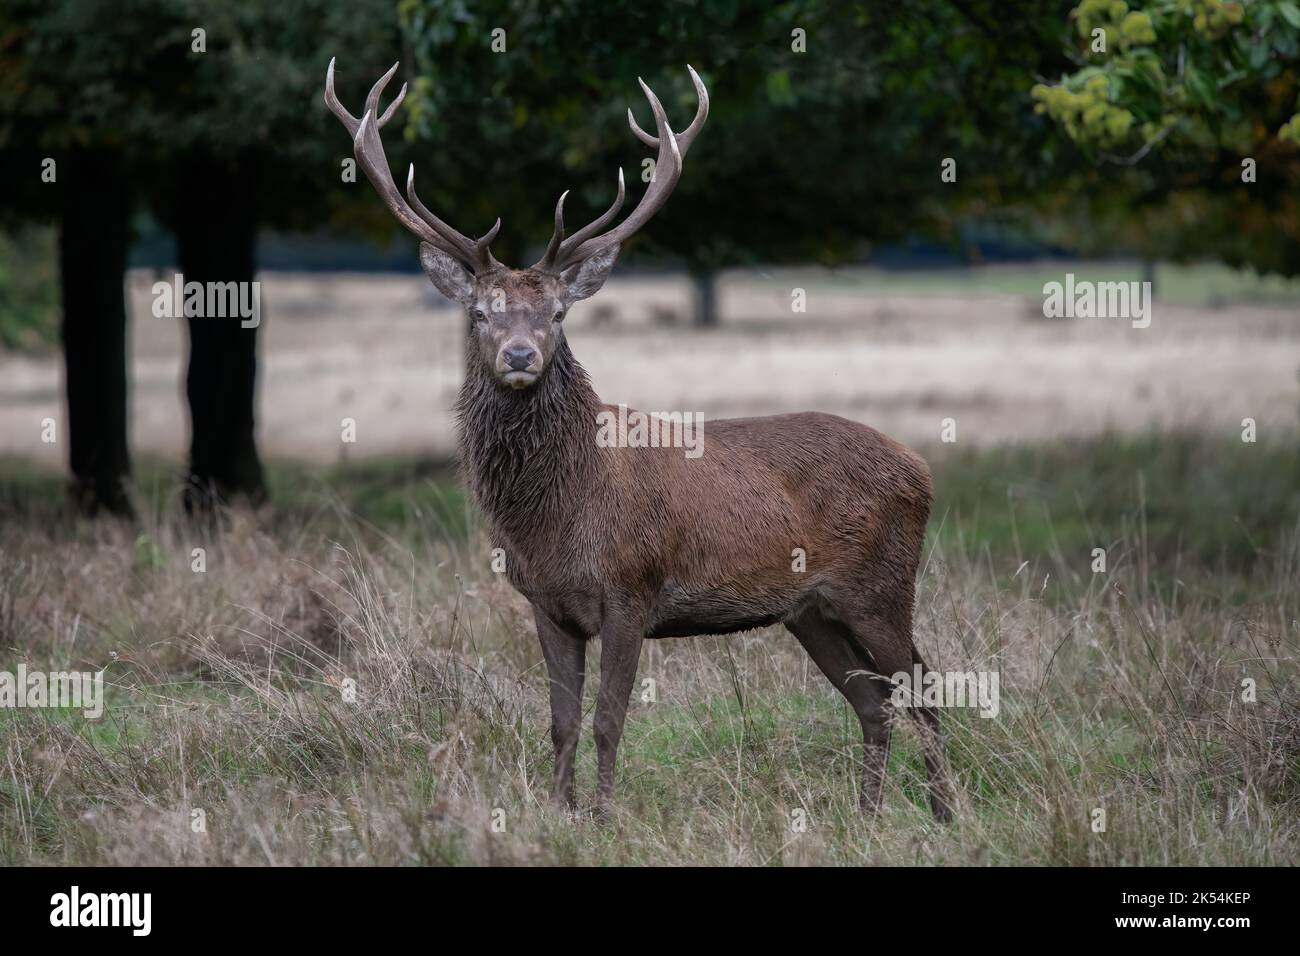 A portrait of a red deer stag standing on a field with trees in the background. He is staring at the camera Stock Photo